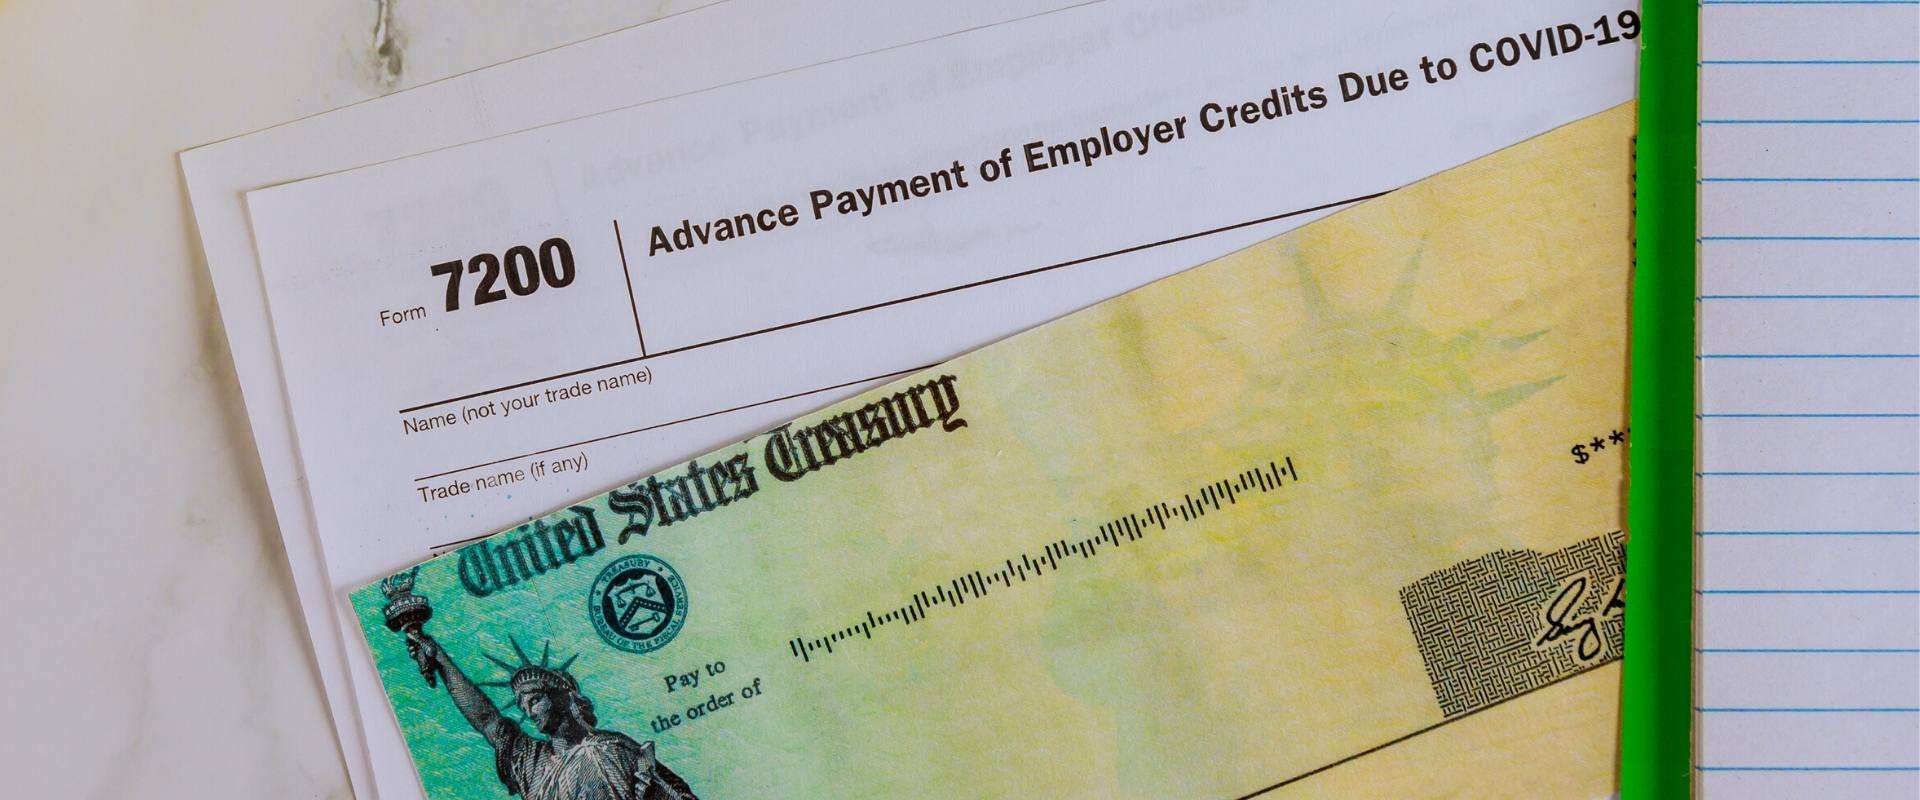 APS Releases Form 7200 Report For COVID 19 Tax Credits